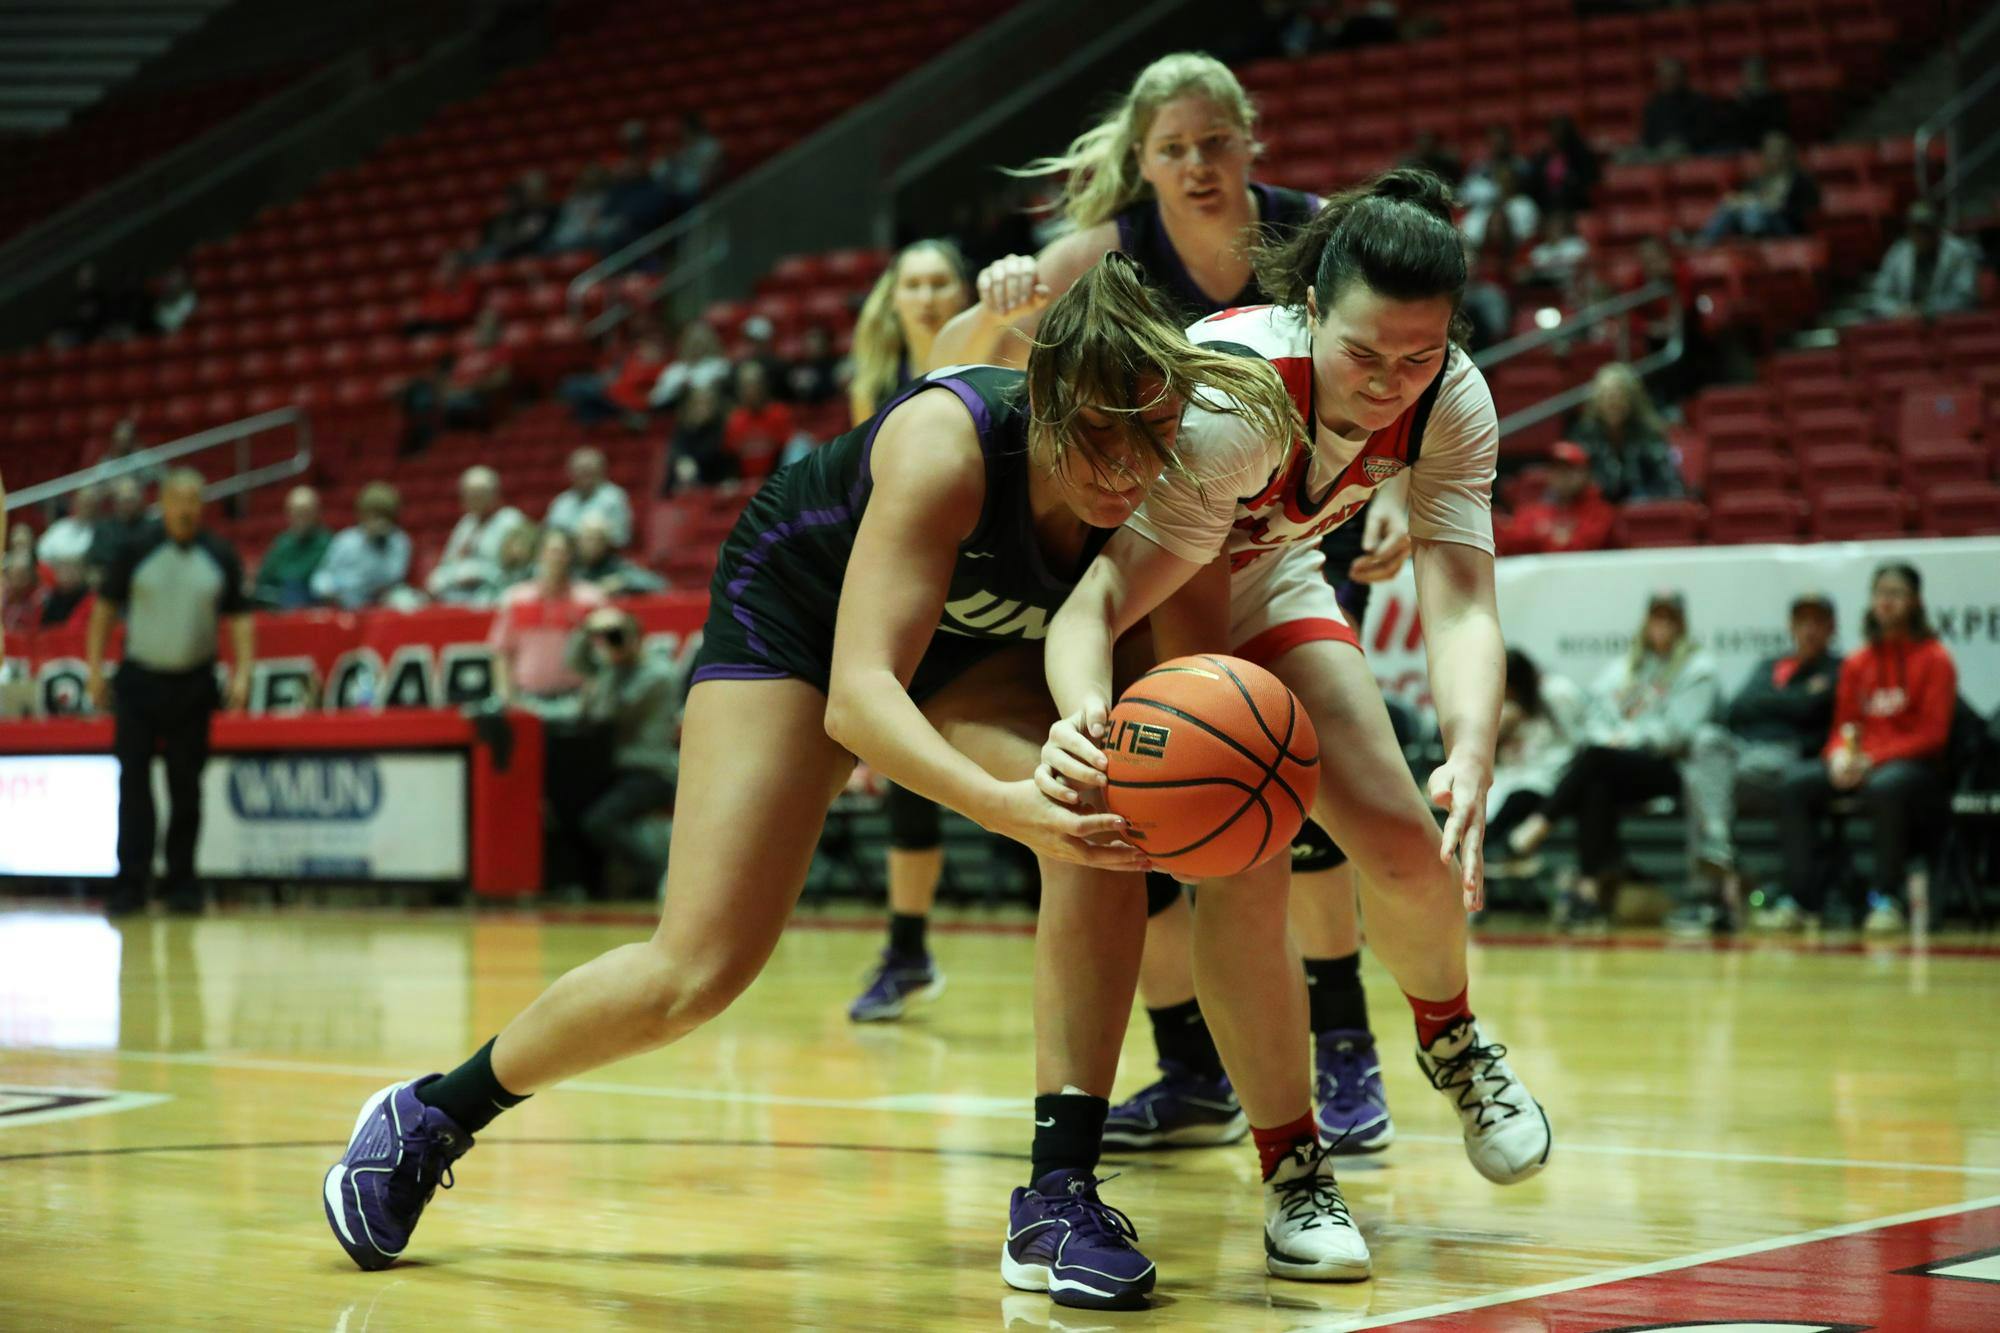 3 Takeaways From The Ball State Womens Basketball Win Against The